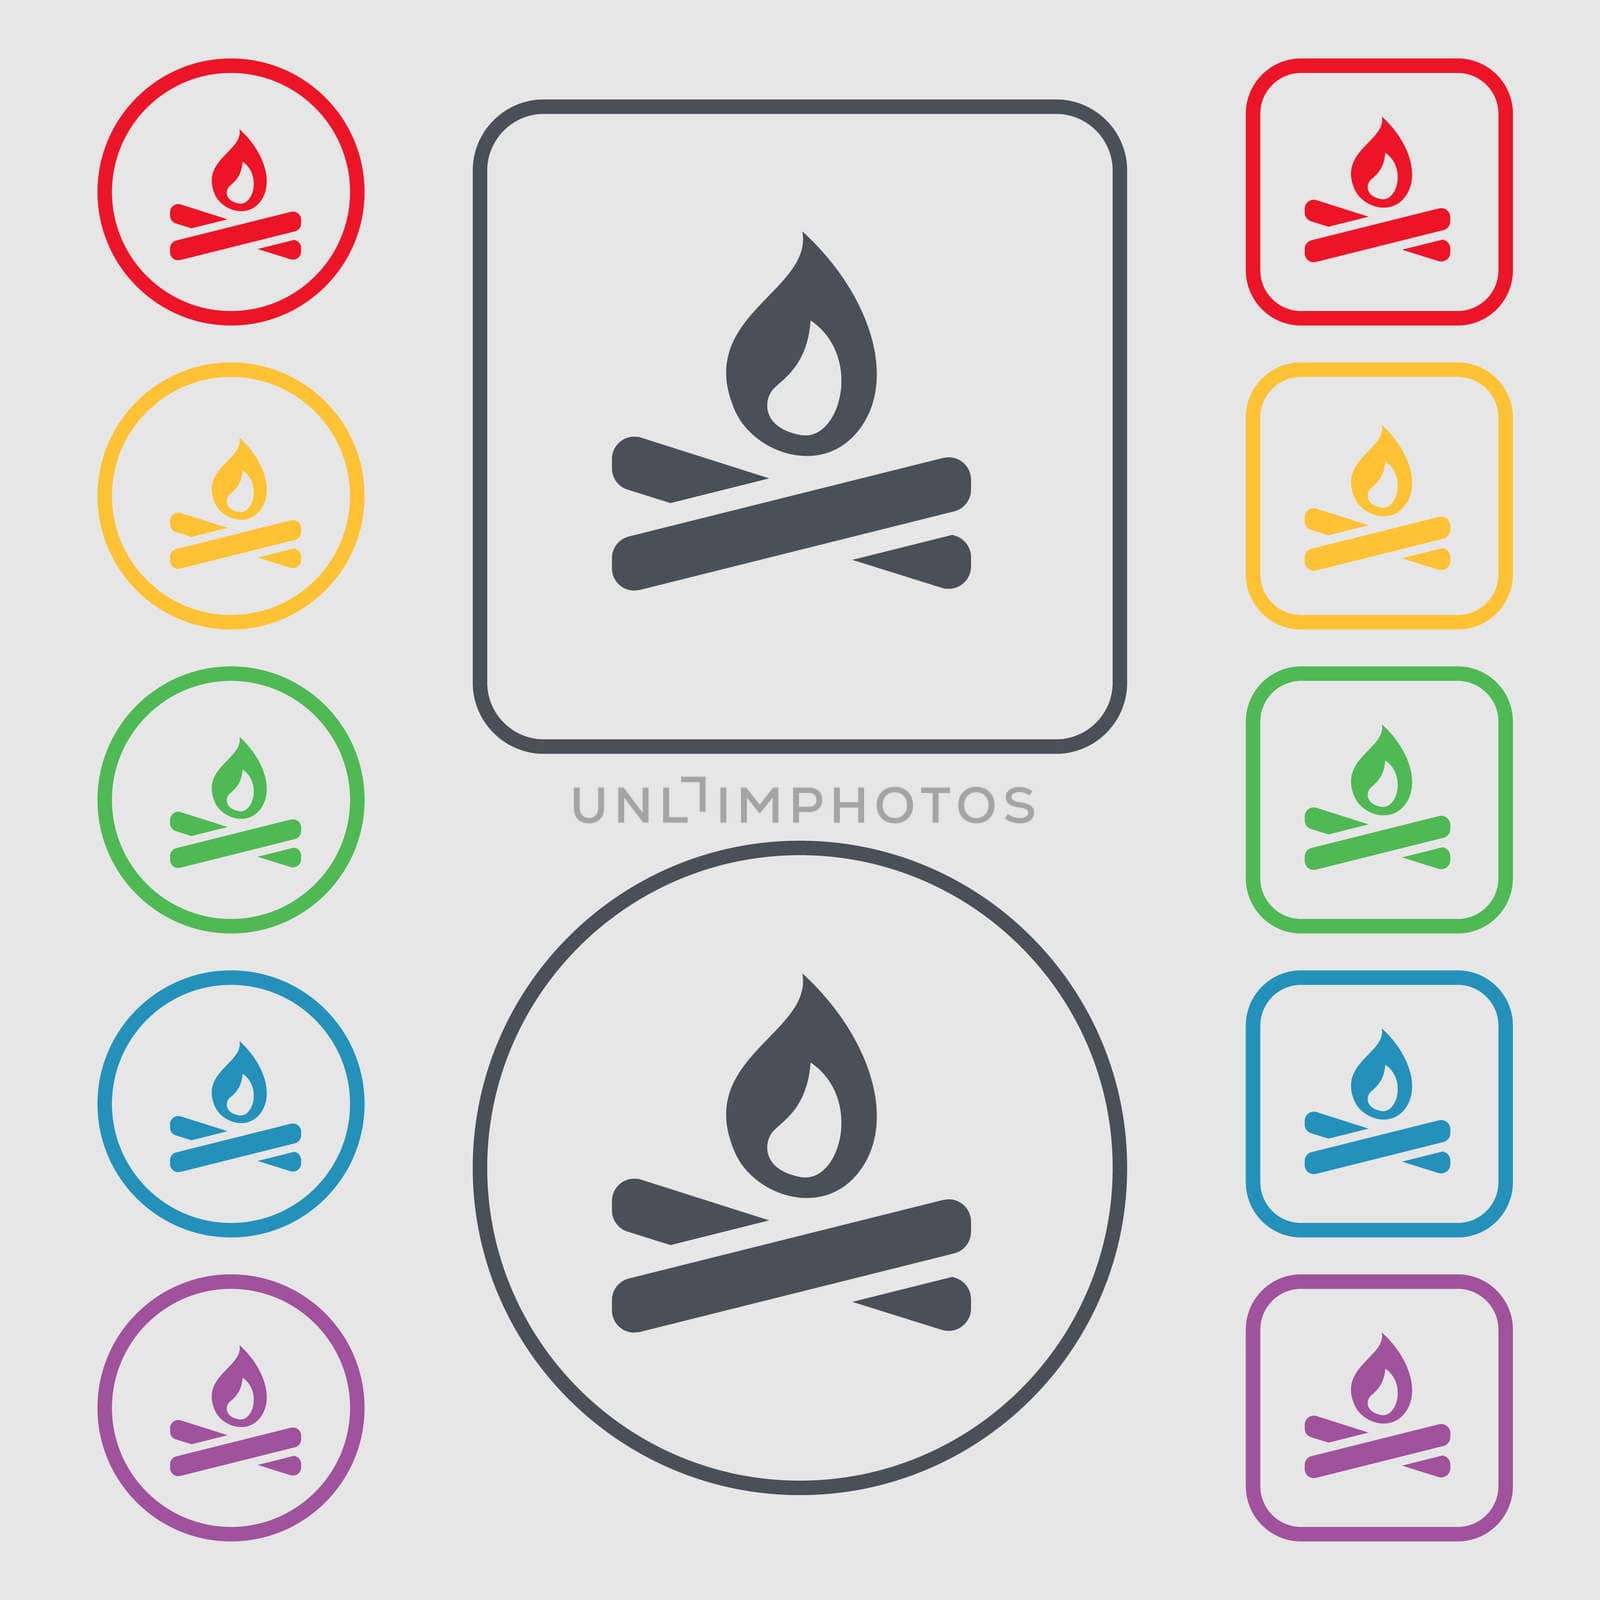 Fire flame icon sign. symbol on the Round and square buttons with frame. illustration